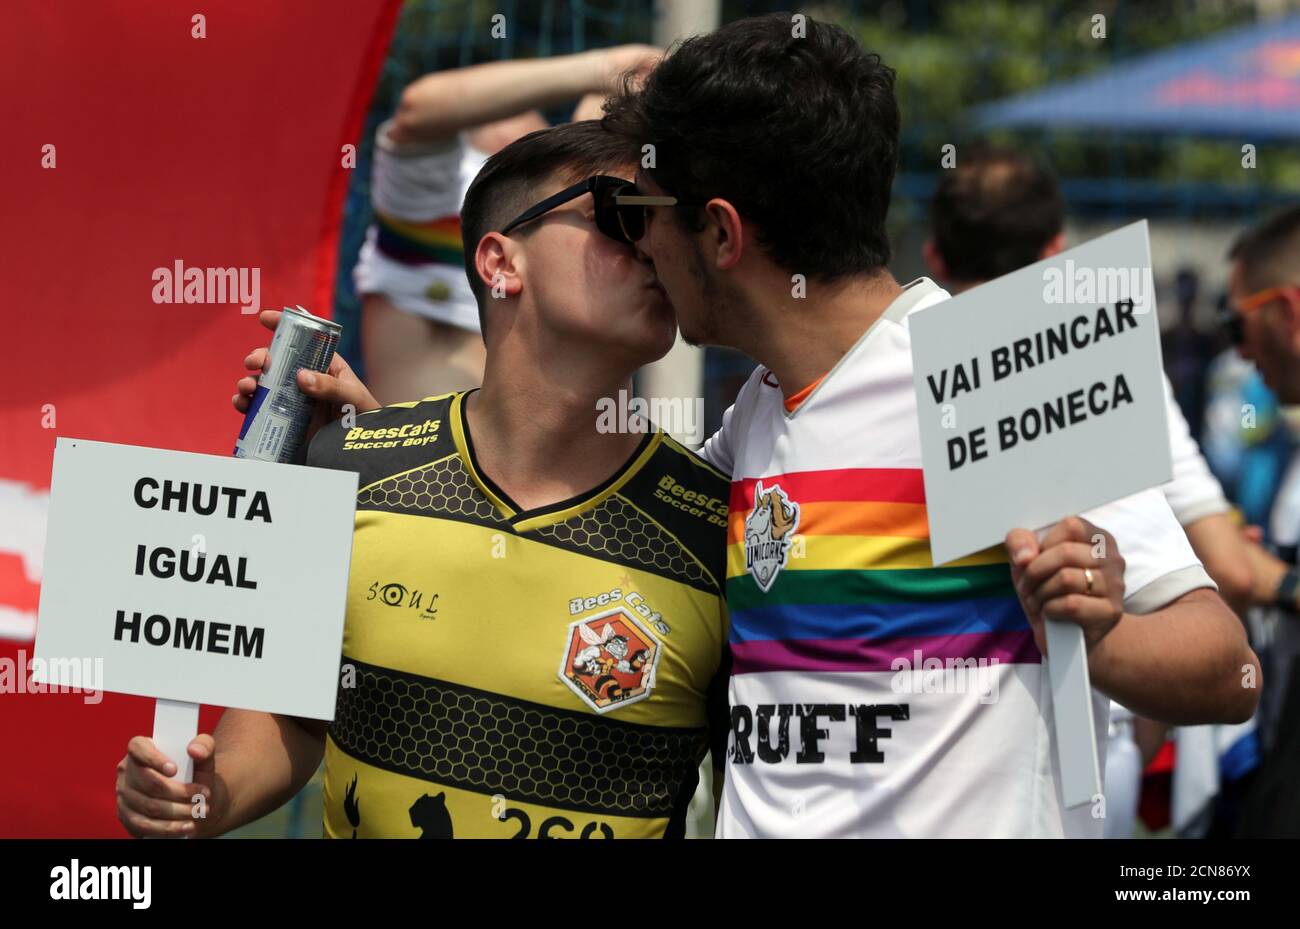 Soccer players of the Unicorns (R) and Bee Cats soccer teams hold placards during the opening ceremony of the Champions LiGay, a gay soccer tournament in Sao Paulo, Brazil November 2, 2018. Picture taken November 2, 2018. Placards read: 'Kick as a male' and 'Go play with doll'. REUTERS/Paulo Whitaker Stock Photo